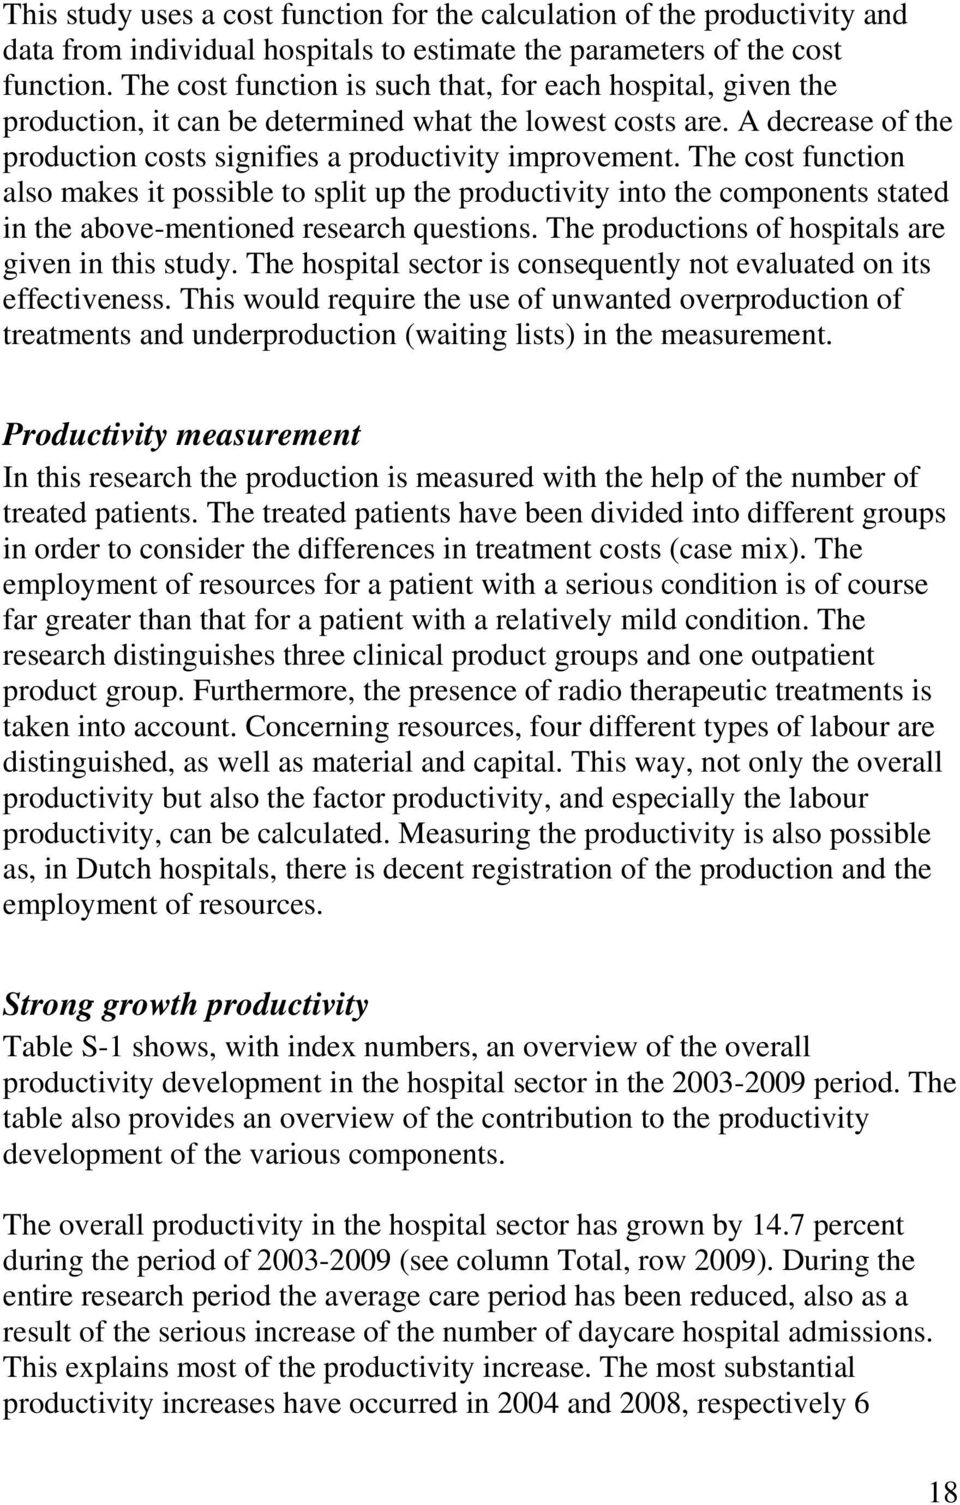 The cost function also makes it possible to split up the productivity into the components stated in the above-mentioned research questions. The productions of hospitals are given in this study.